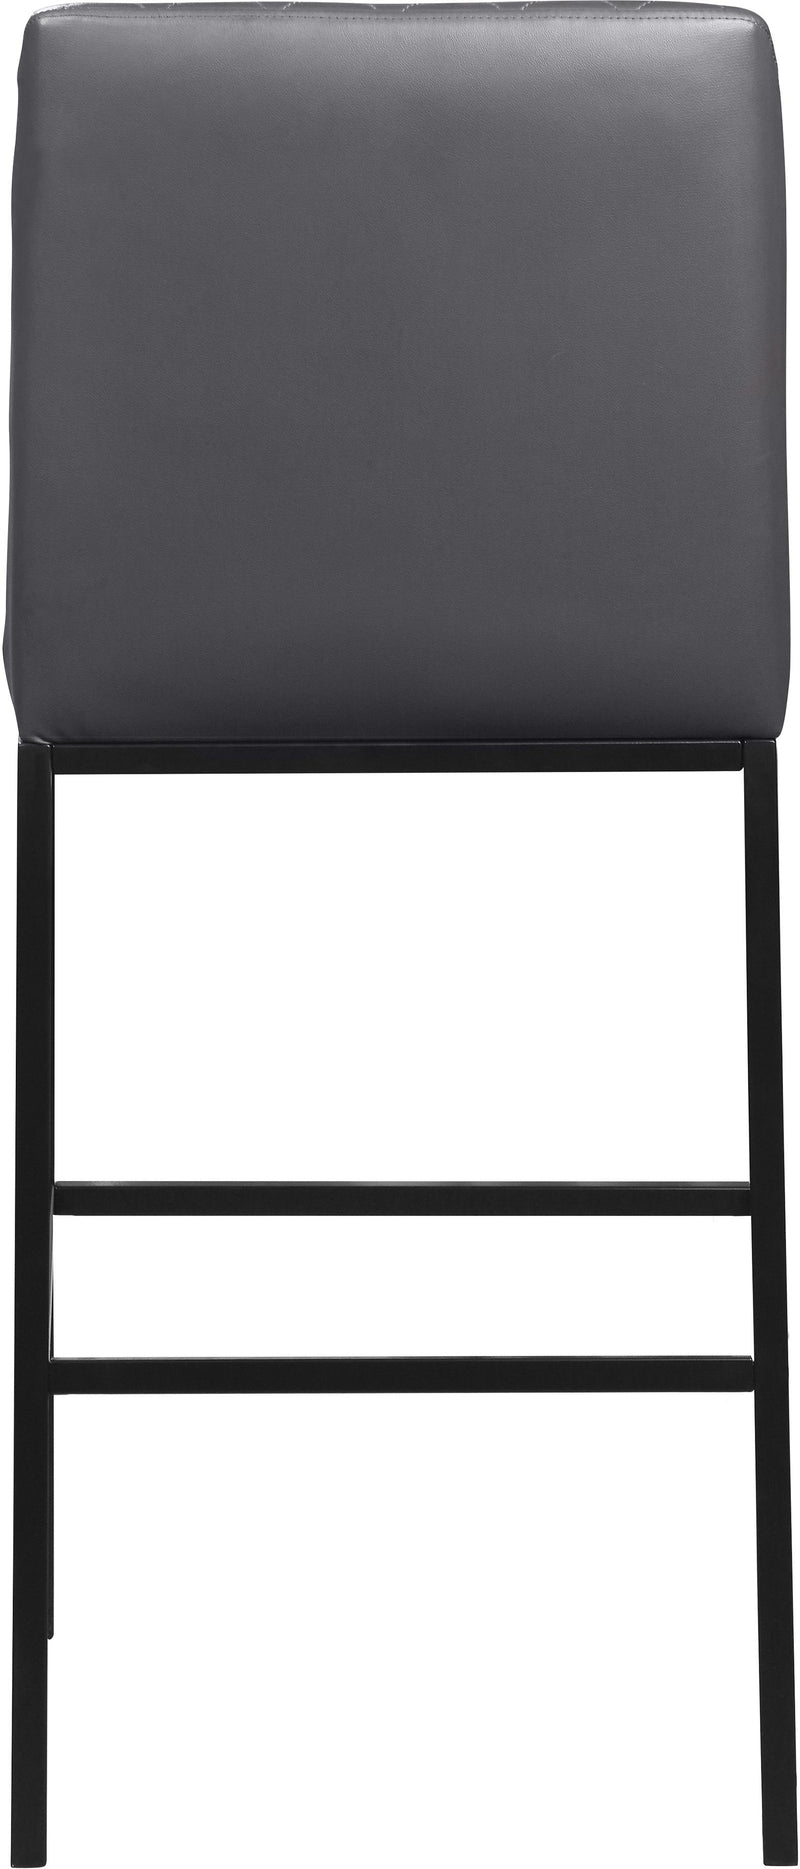 Bryce Grey Faux Leather Stool